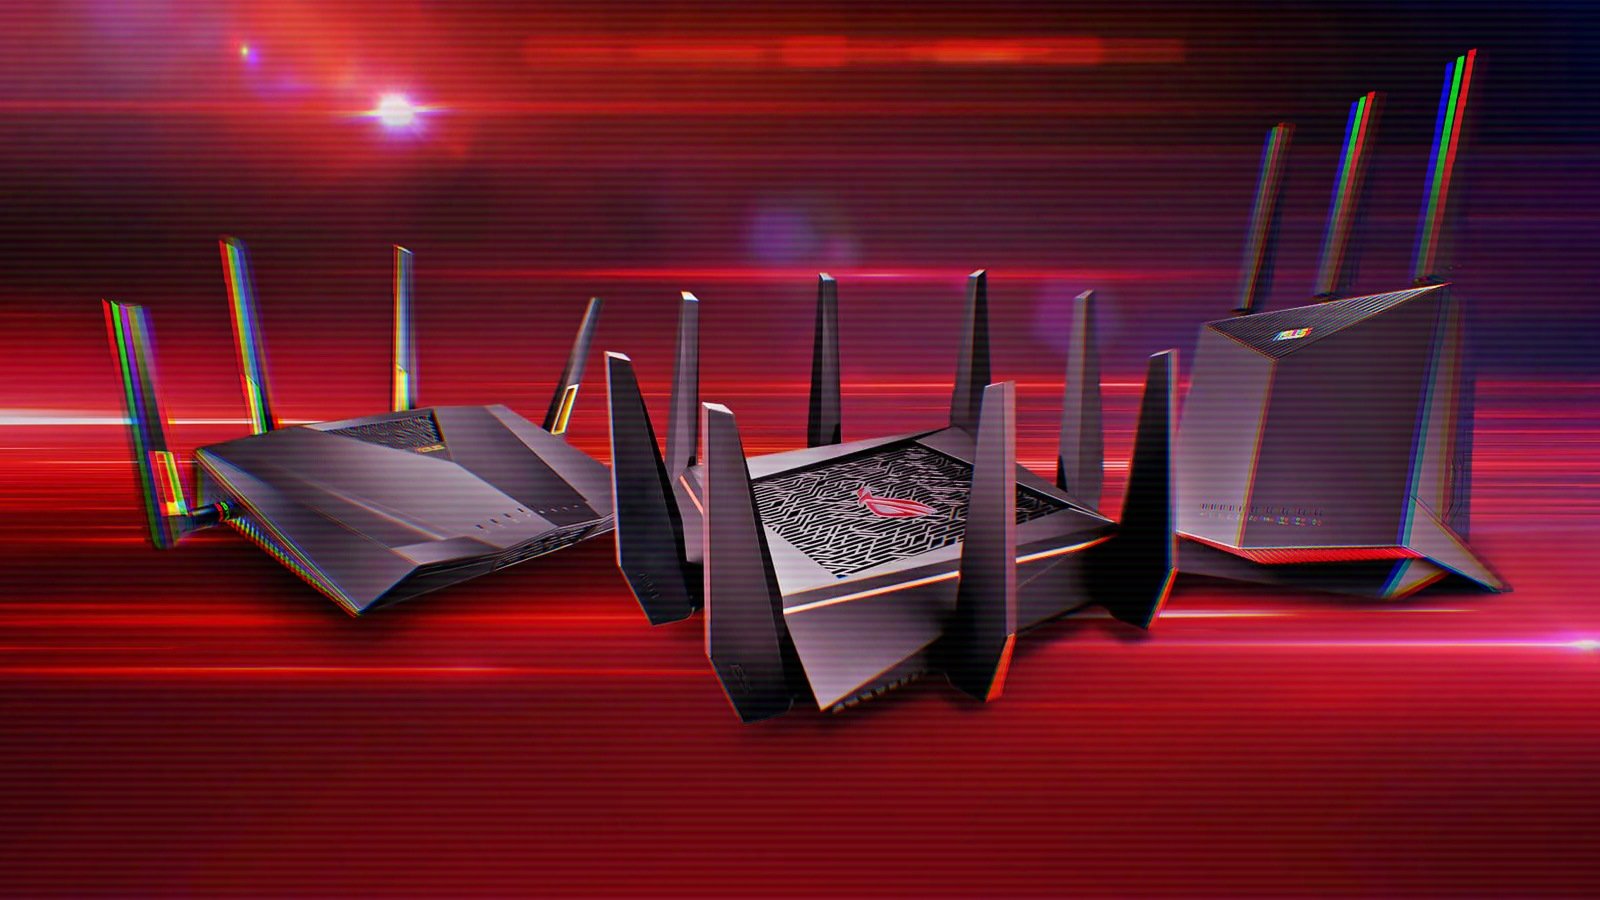 ASUS routers vulnerable to critical remote code execution flaws – Source: www.bleepingcomputer.com